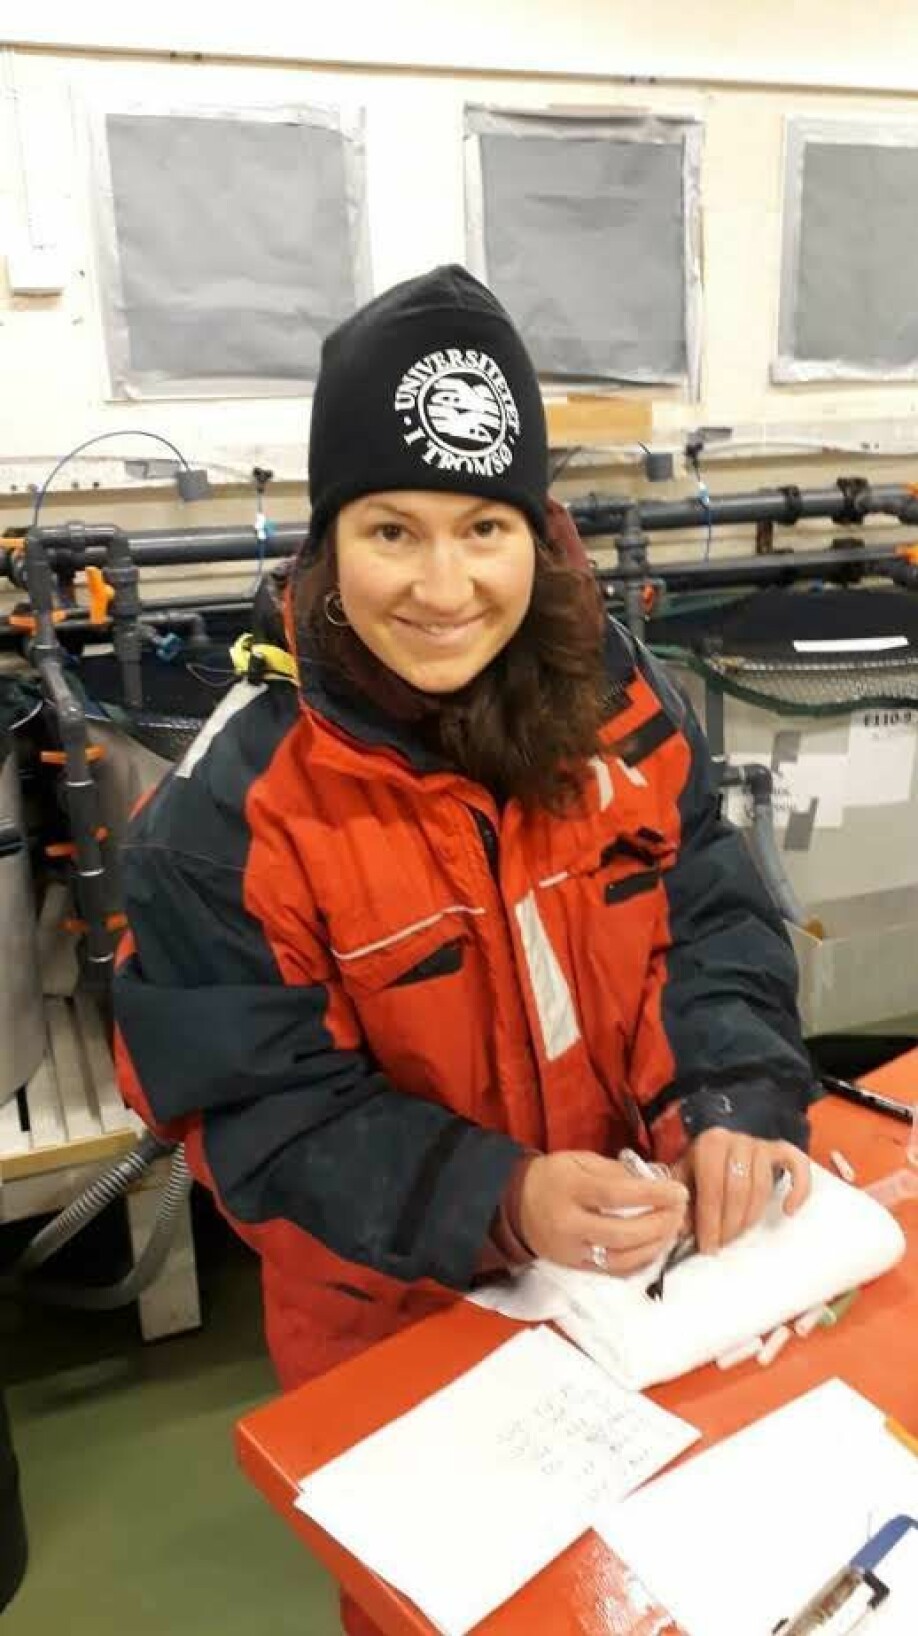 Morgan Lizabeth Bender is a PhD candidate in the Department of Arctic and Marine Biology at UiT Norway's Arctic University.